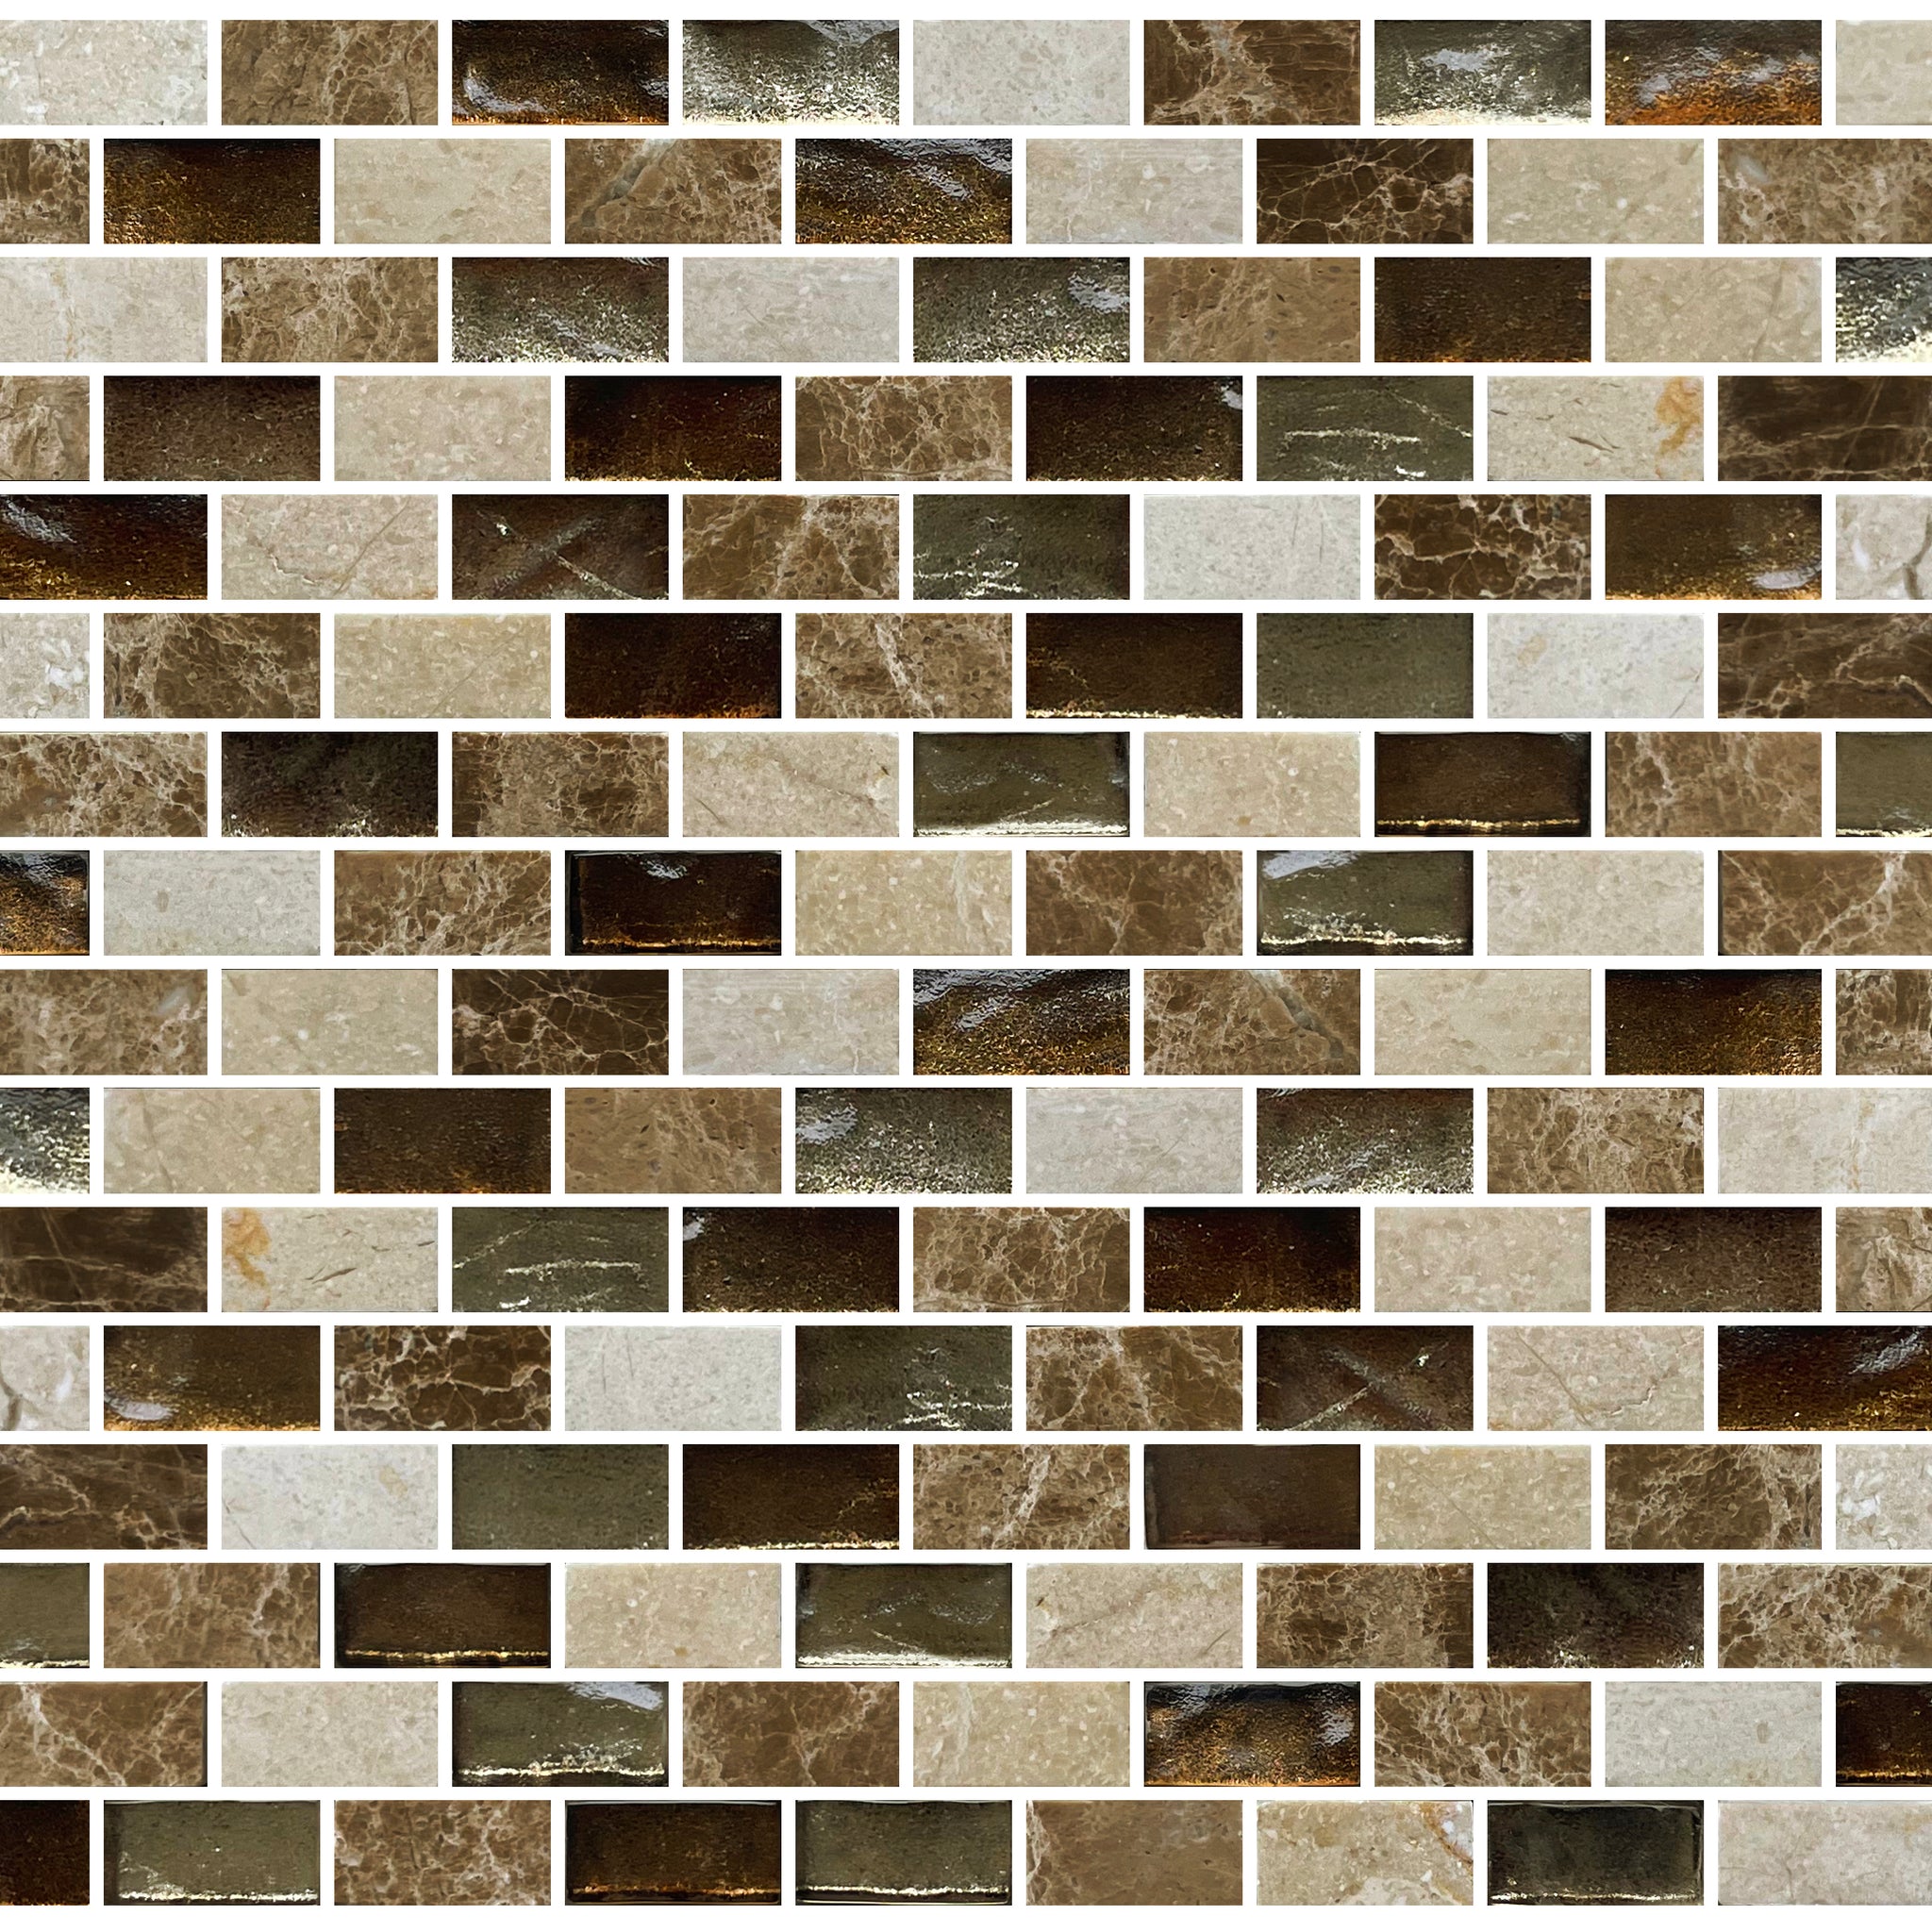 12 x 11 inch Glass & Stone Mosaic Tile with Brown Color and Glossy Finish